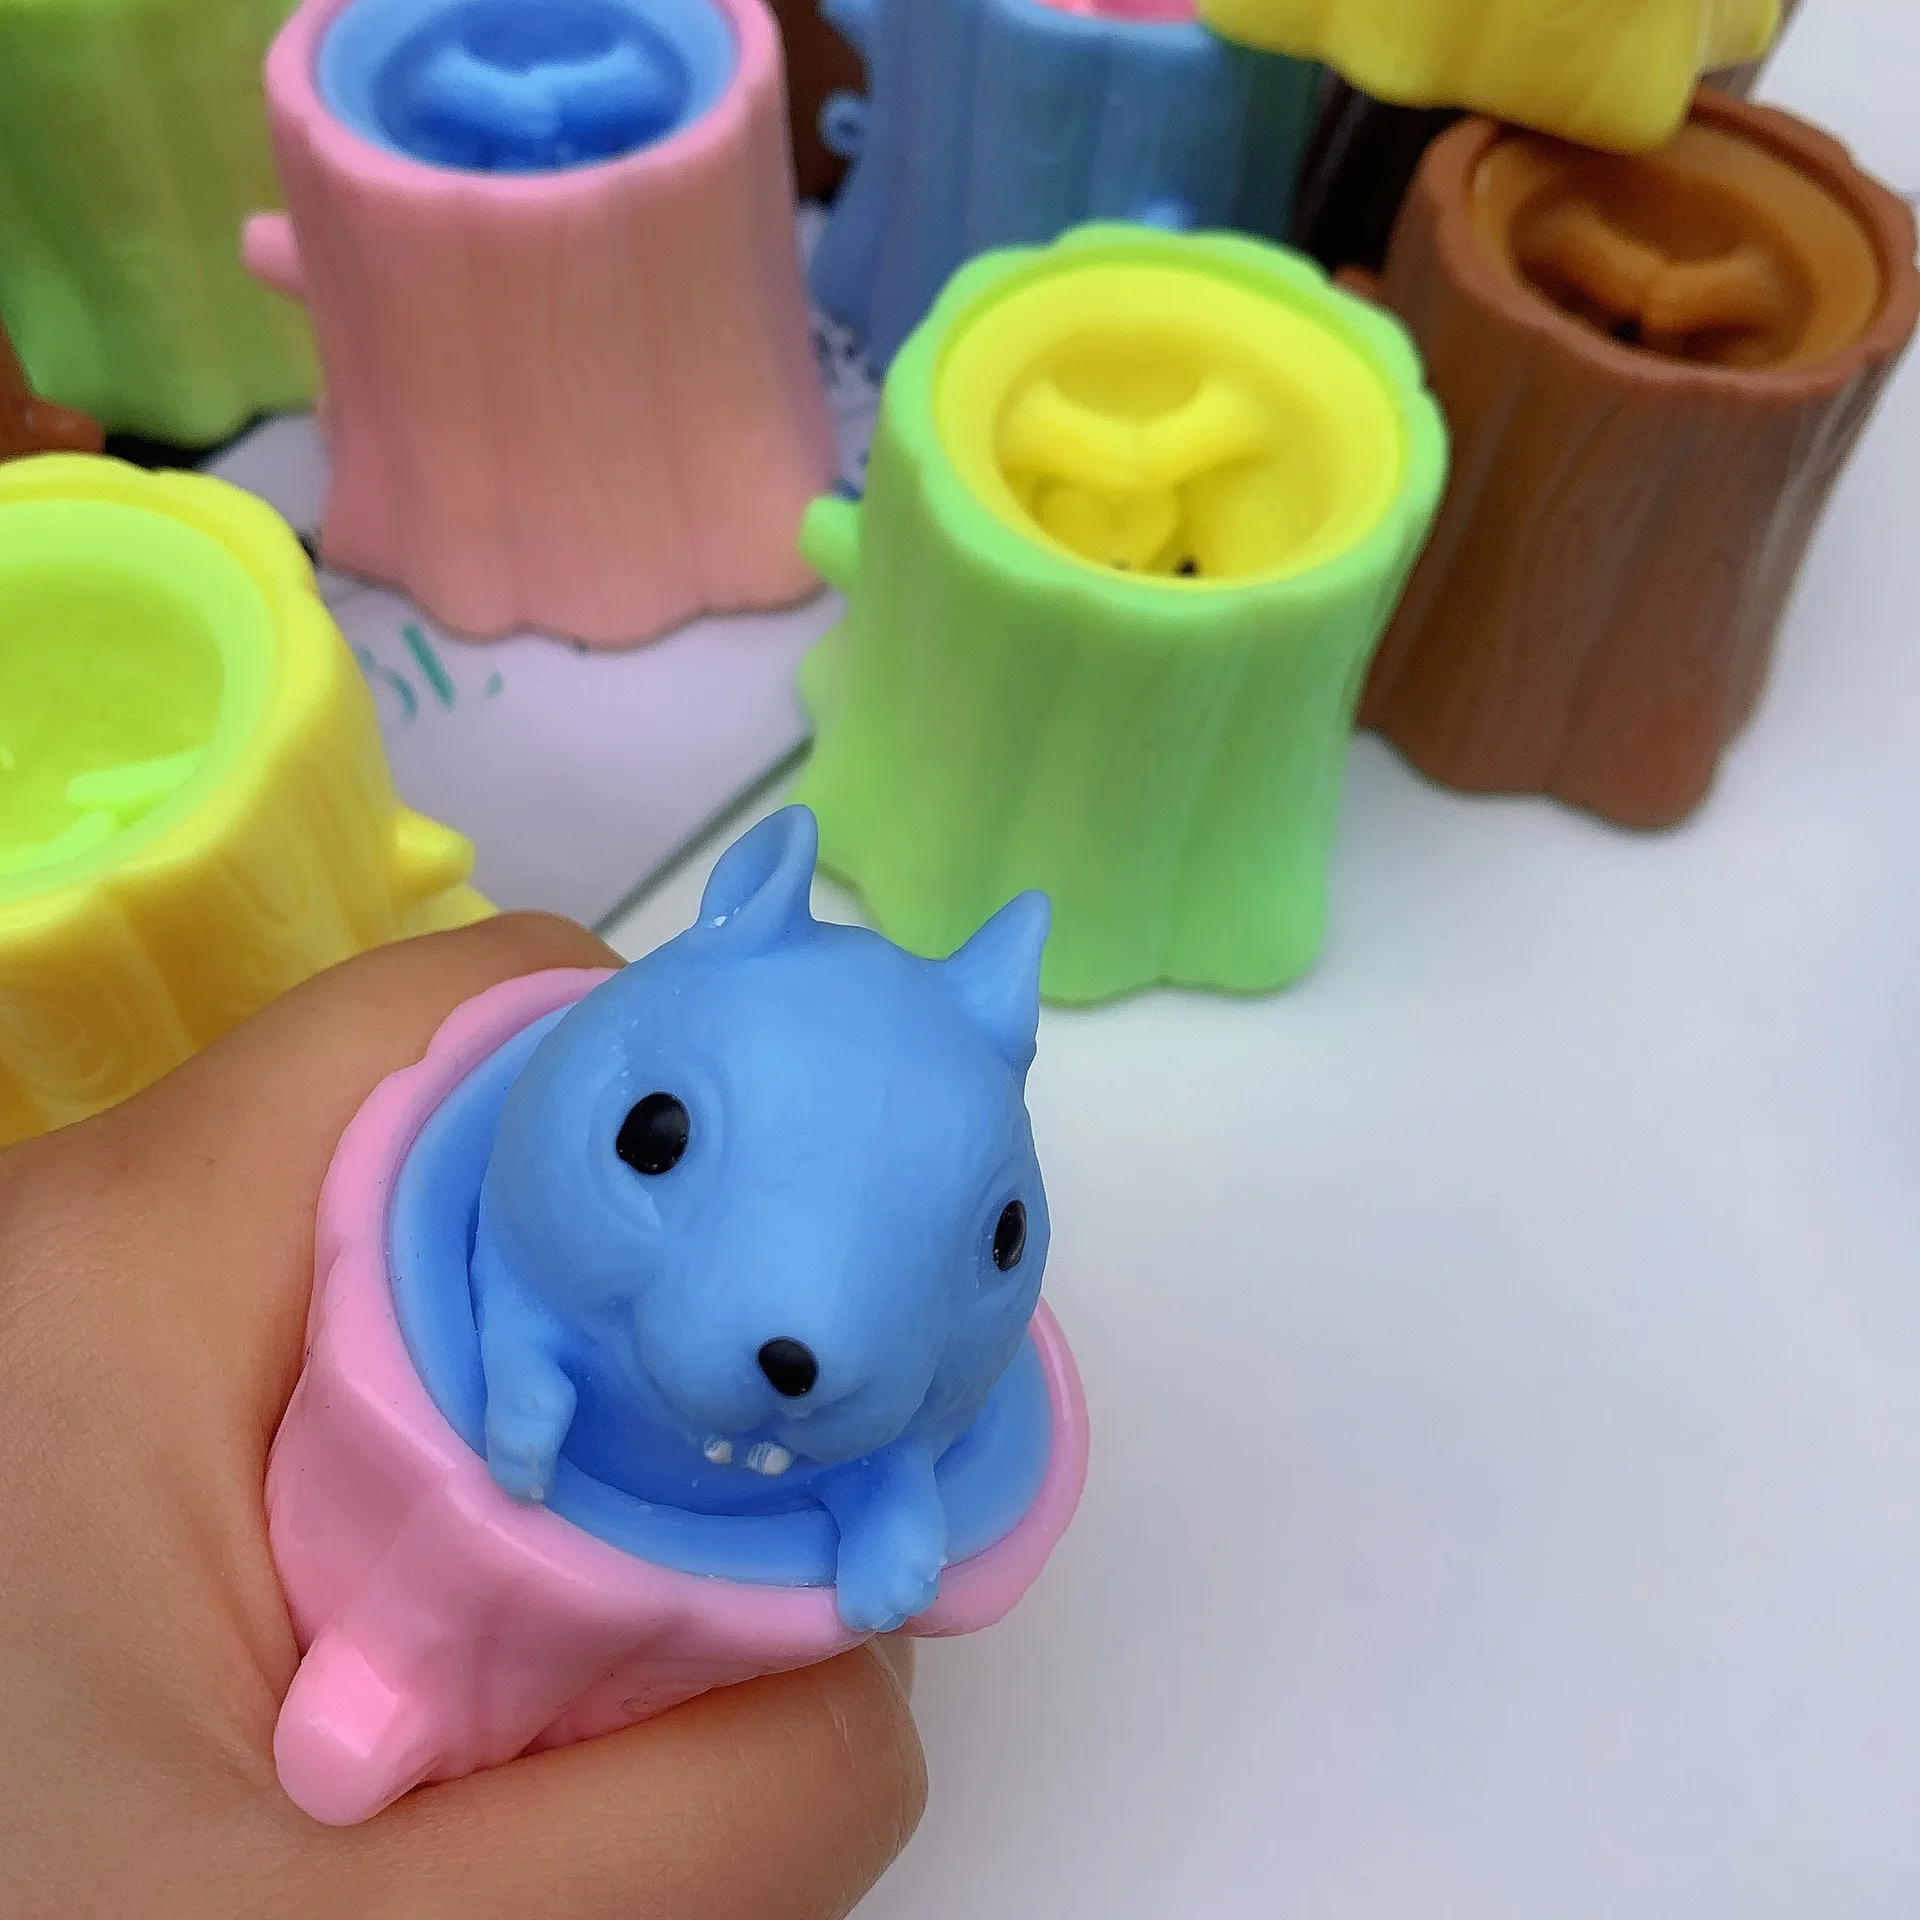 TR New Fidget Toy Cute Little Mouse Pinch Anti-Stress Baby Girl Gift Child Aame Adult Fidget Decompression Toy enlarge